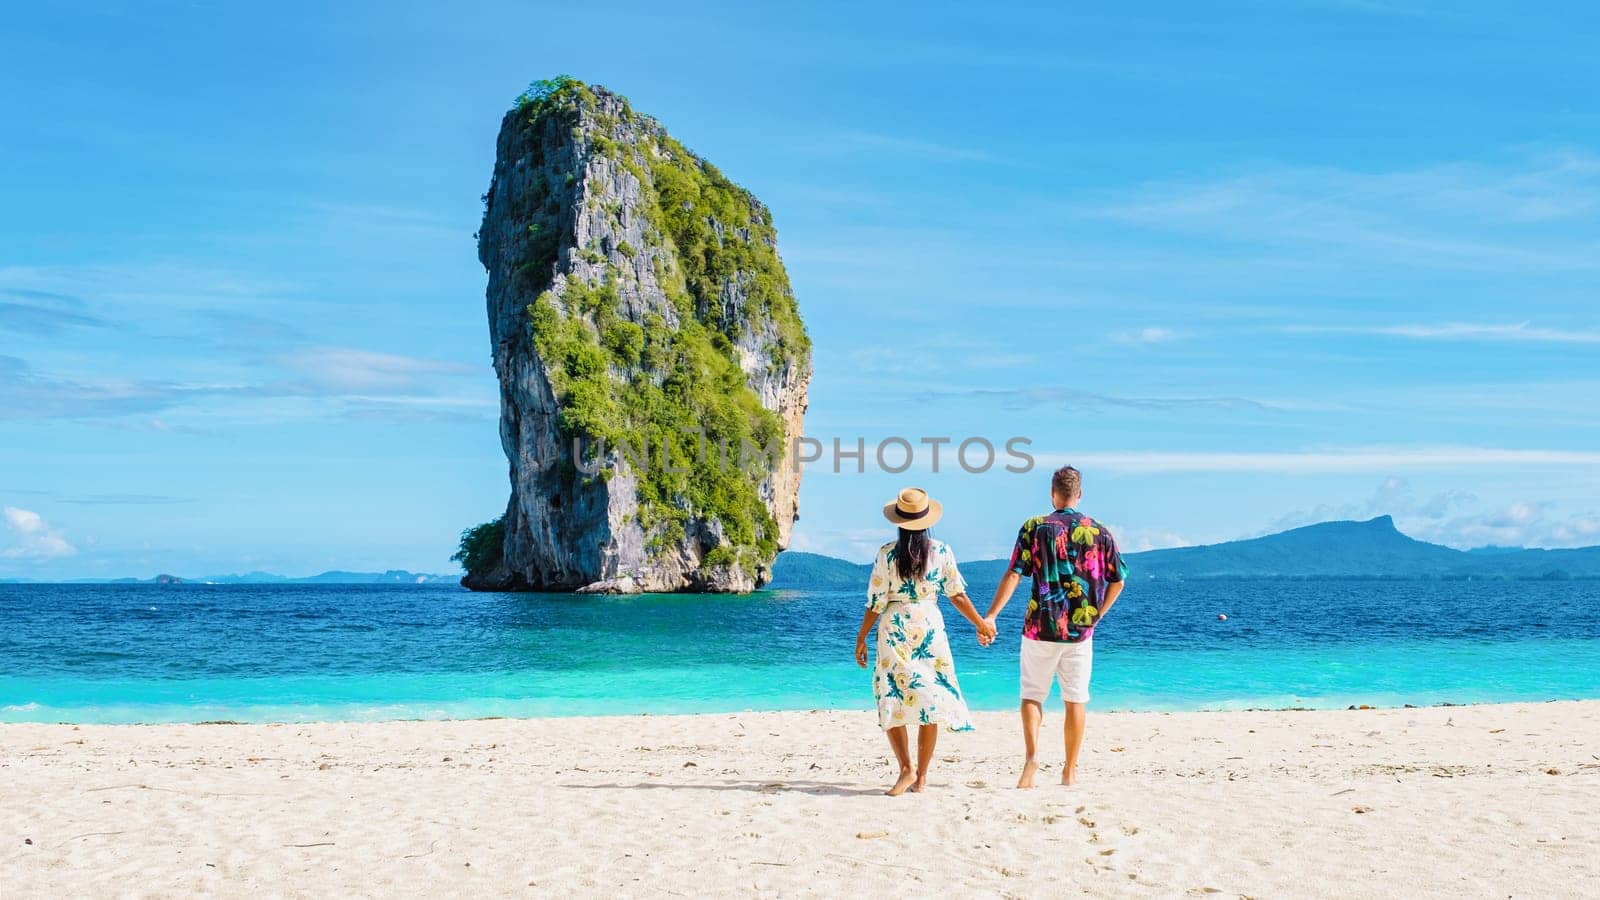 Diverse couple of Asian women and European men walking on the tropical beach of Koh Poda Island Krabi Thailand. Beautiful tropical beach in Thailand with a limestone cliff island in front, rear view